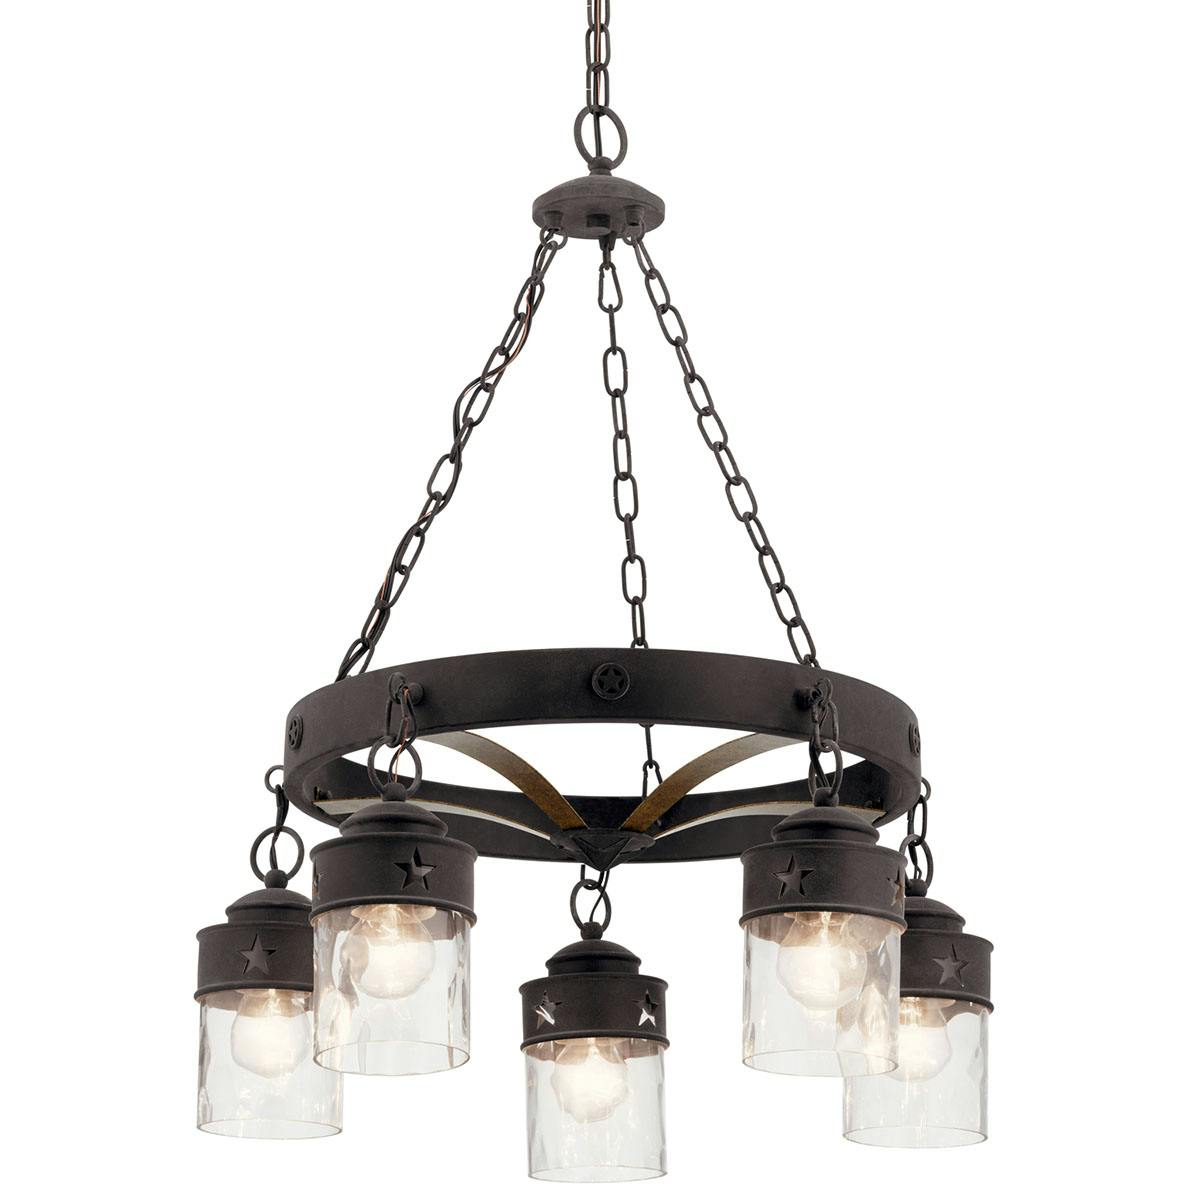 Grainger 24.37" 5 Light Chandelier Zinc without the canopy on a white background